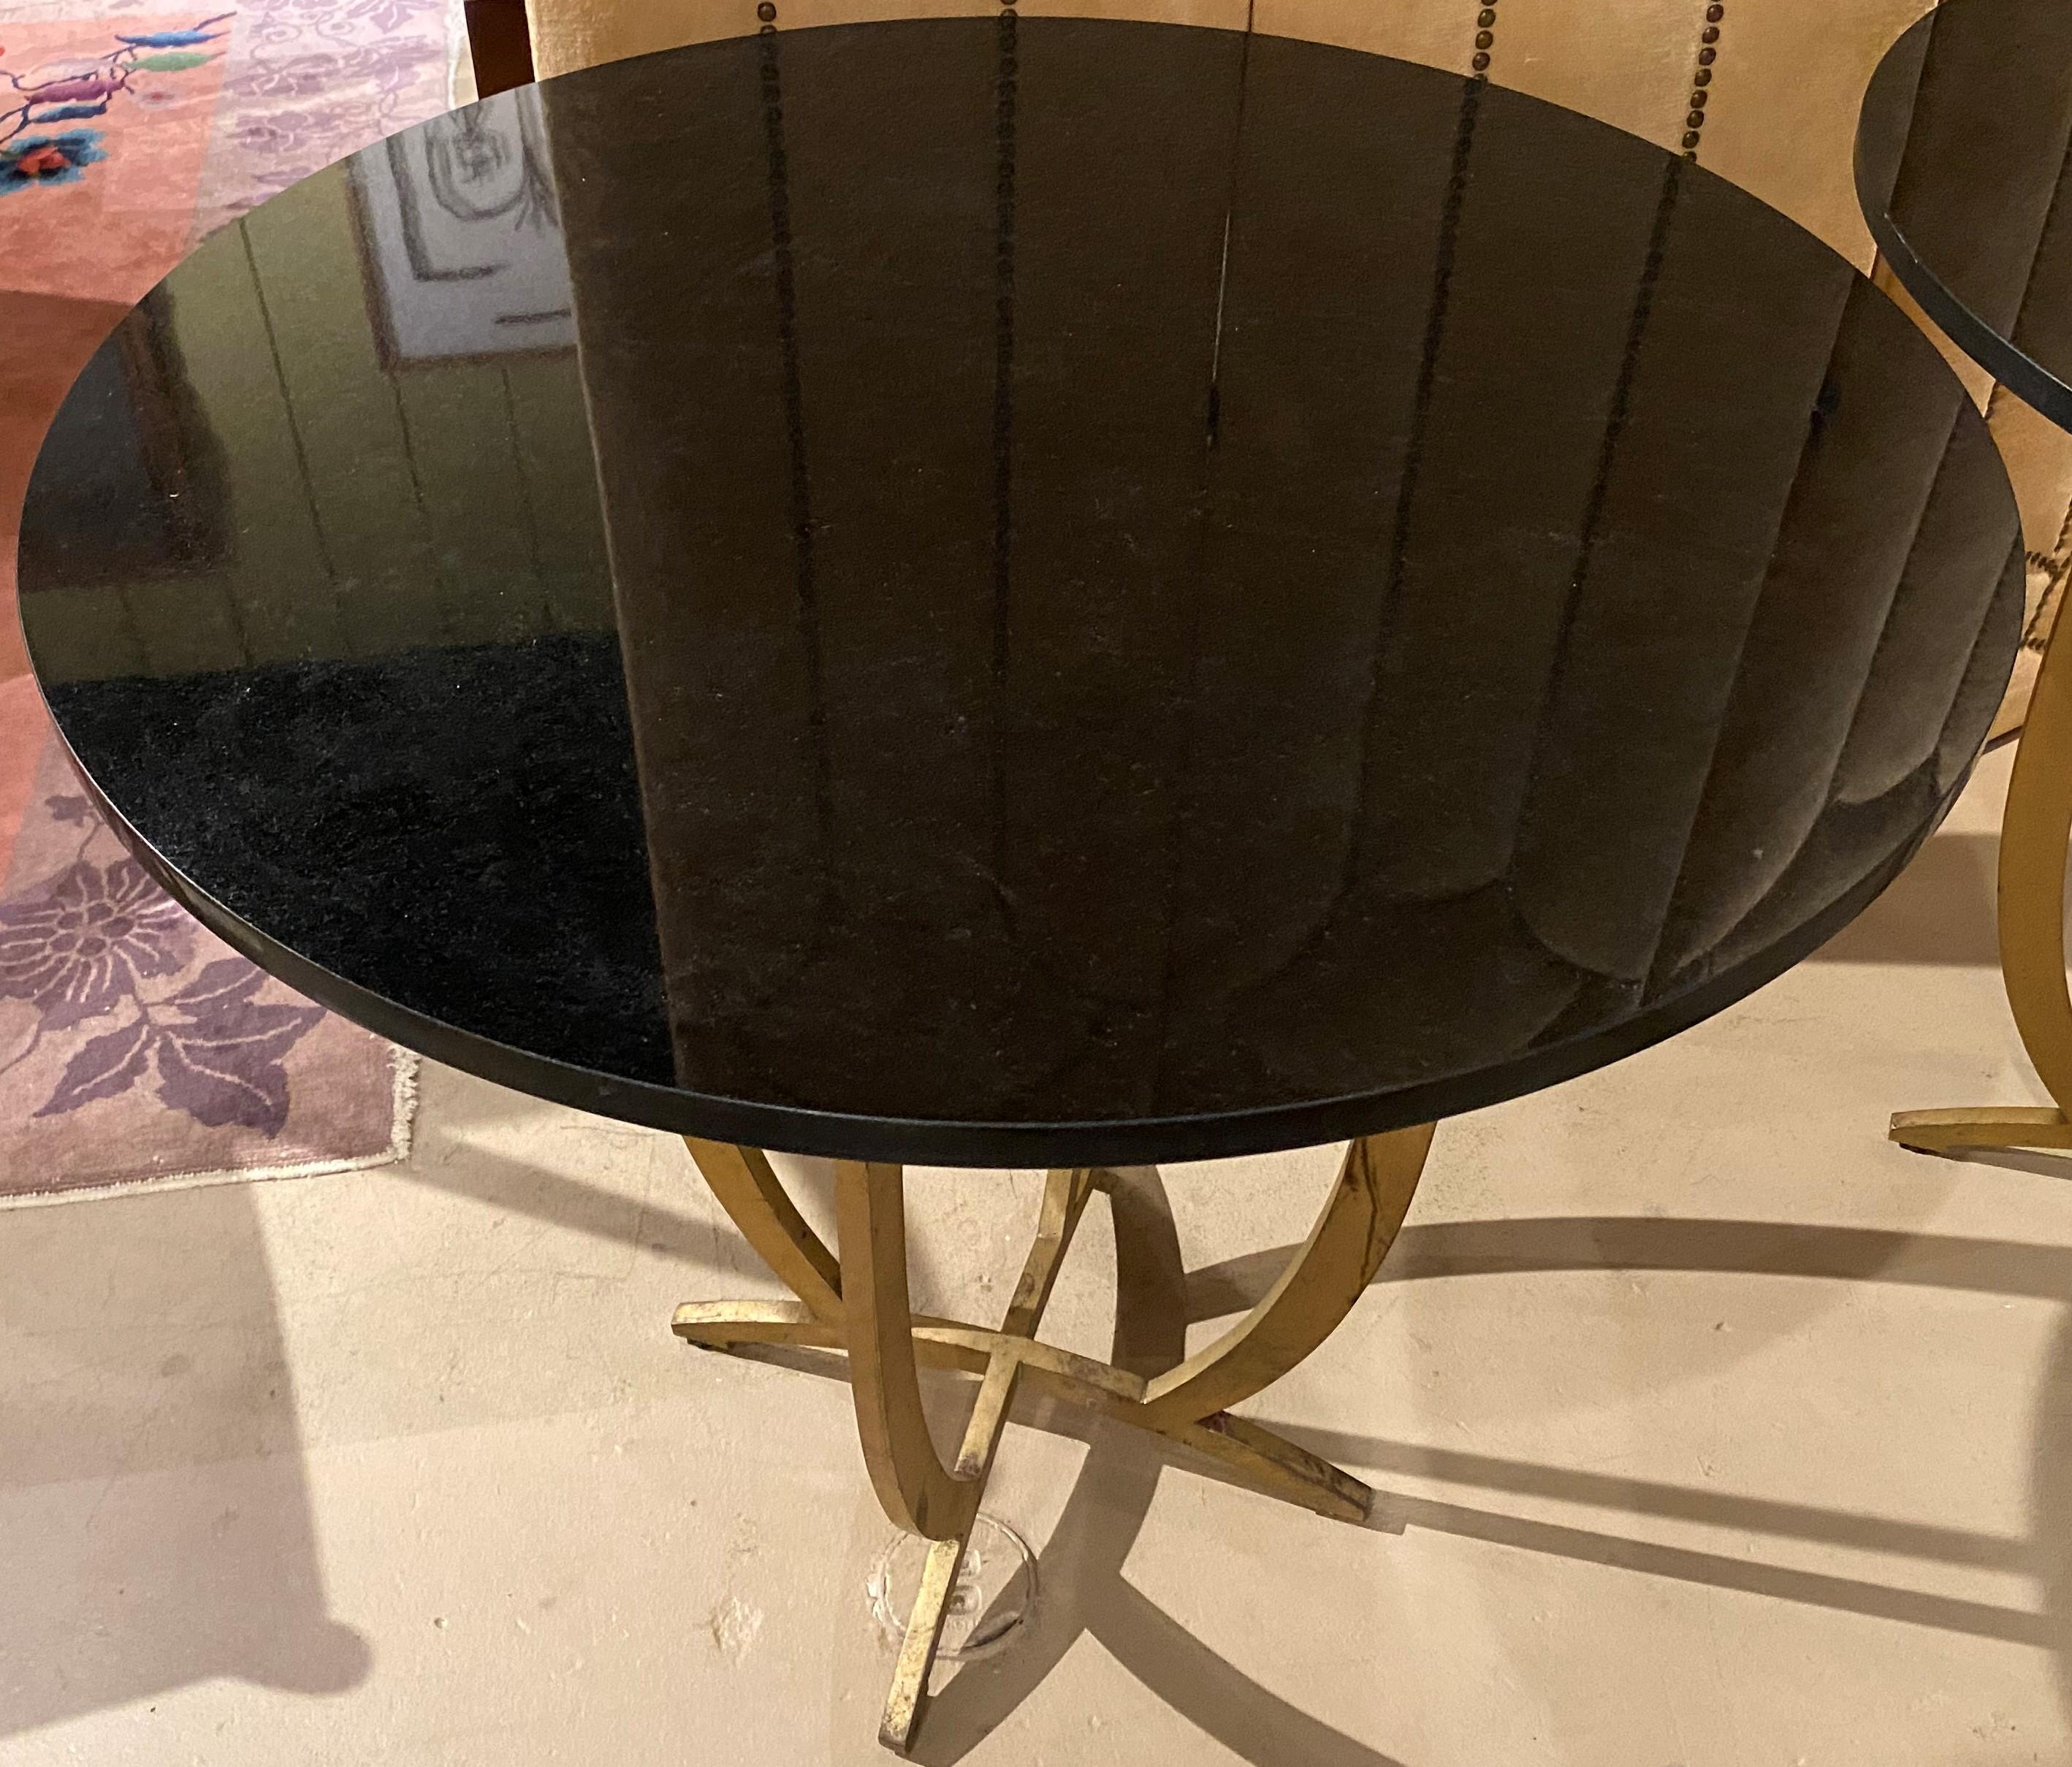 A fine solid pair of modernist black marble top tables with stylish gilt iron bases, in very good condition, with a few surface rubs, imperfections, and wear commensurate with age and use. The pair probably dates to the second half of the 20th